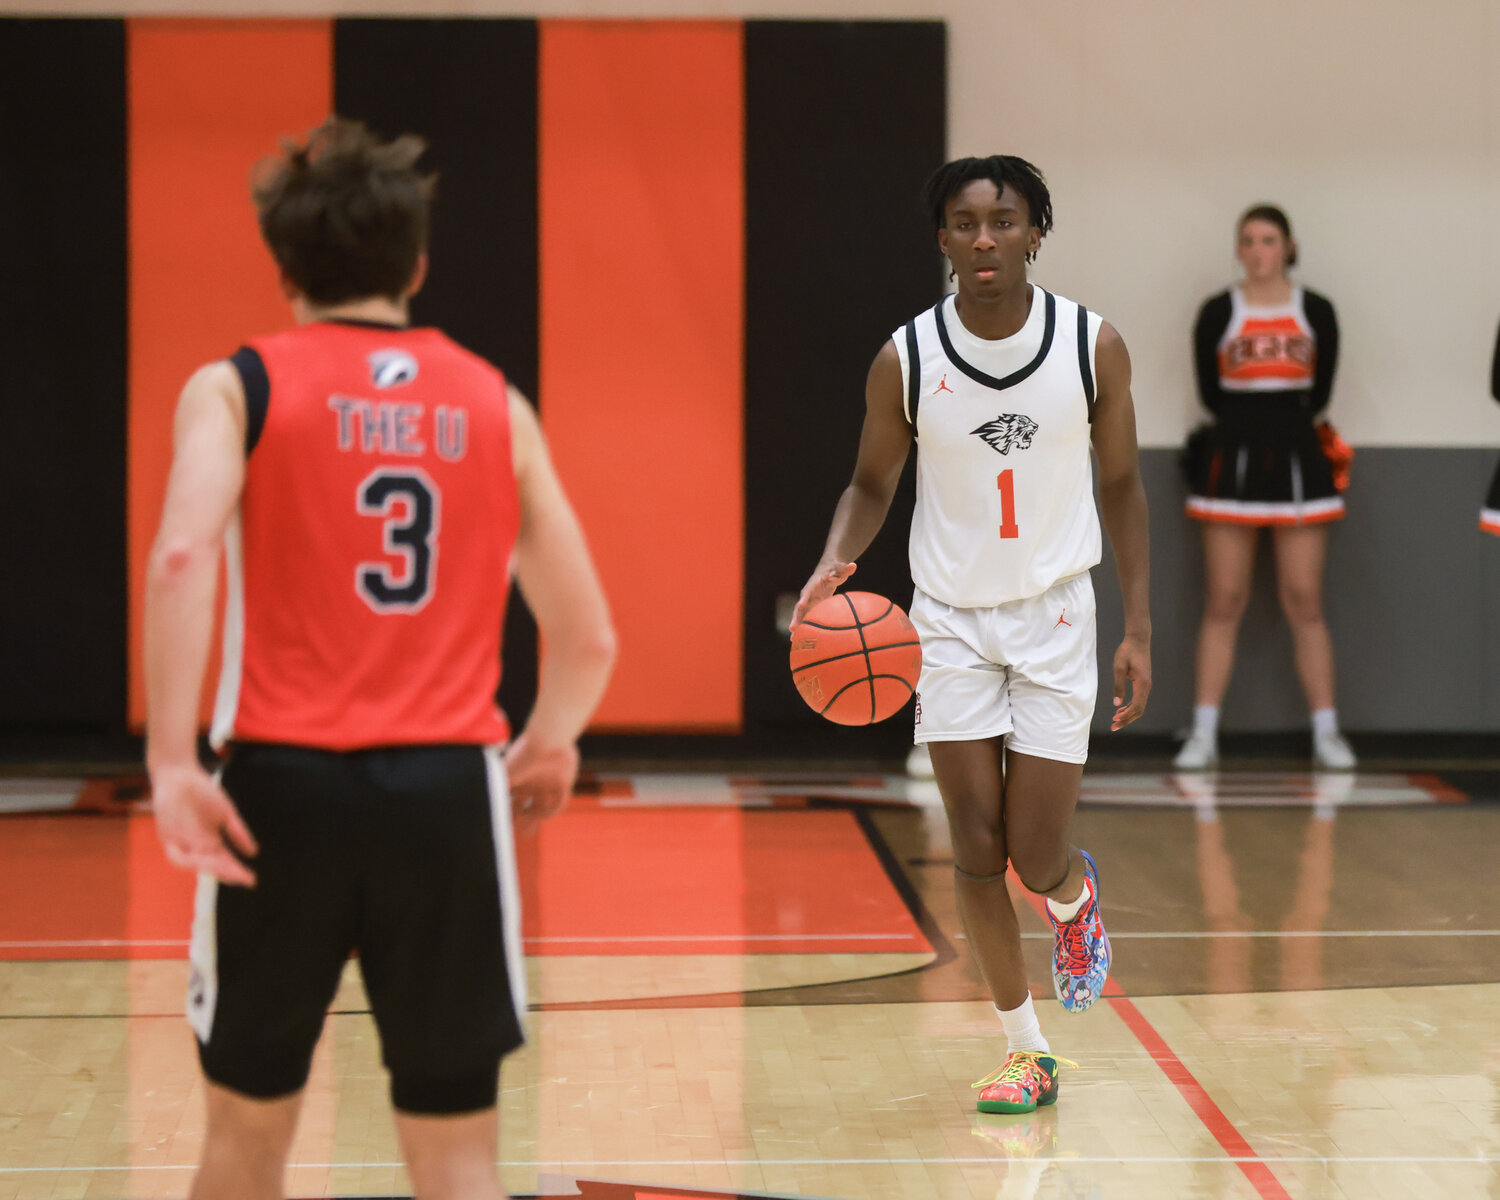 Senior Derick Amanor moves the basketball up the floor on Tuesday, Jan. 30 in the Tigers’ 55-35 loss to the Union Titans.